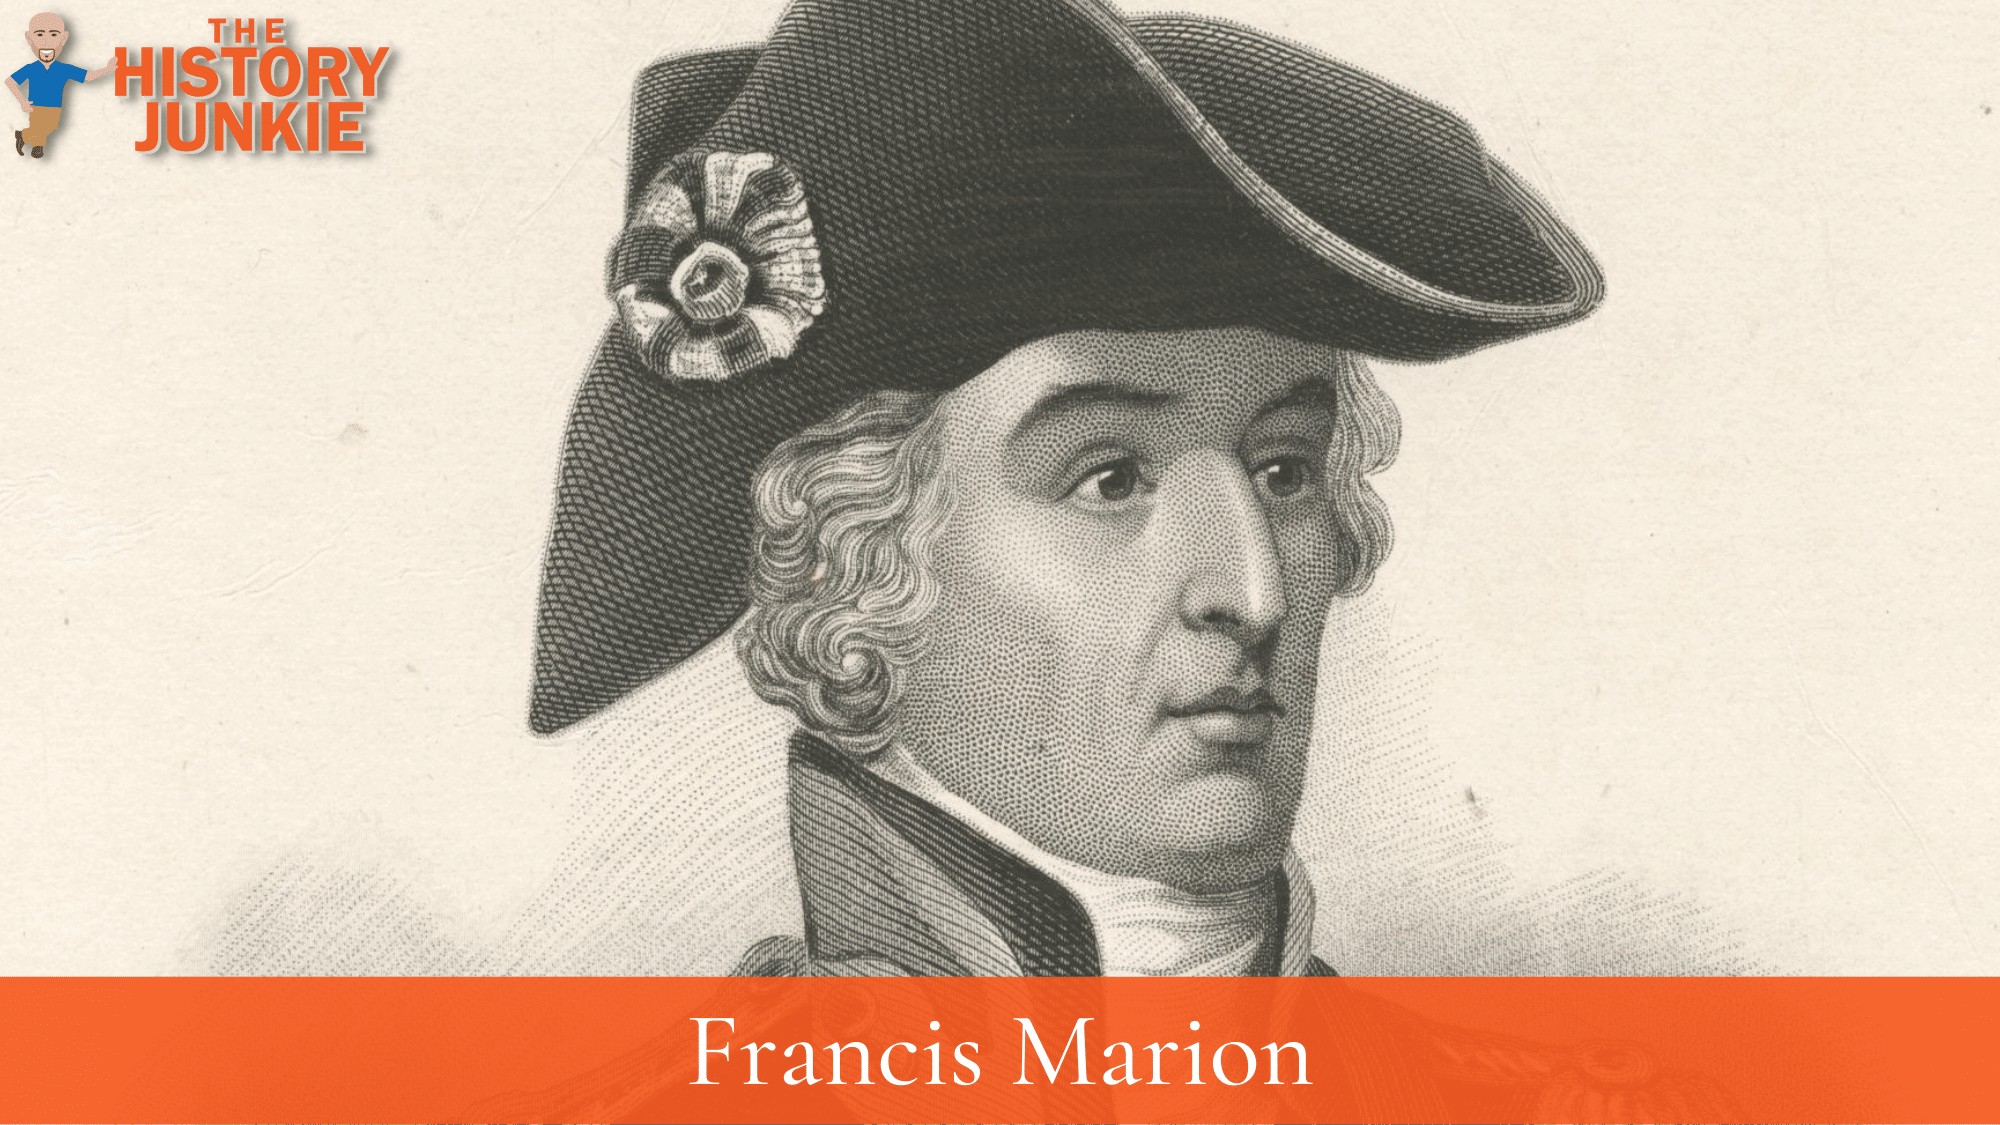 Francis Marion